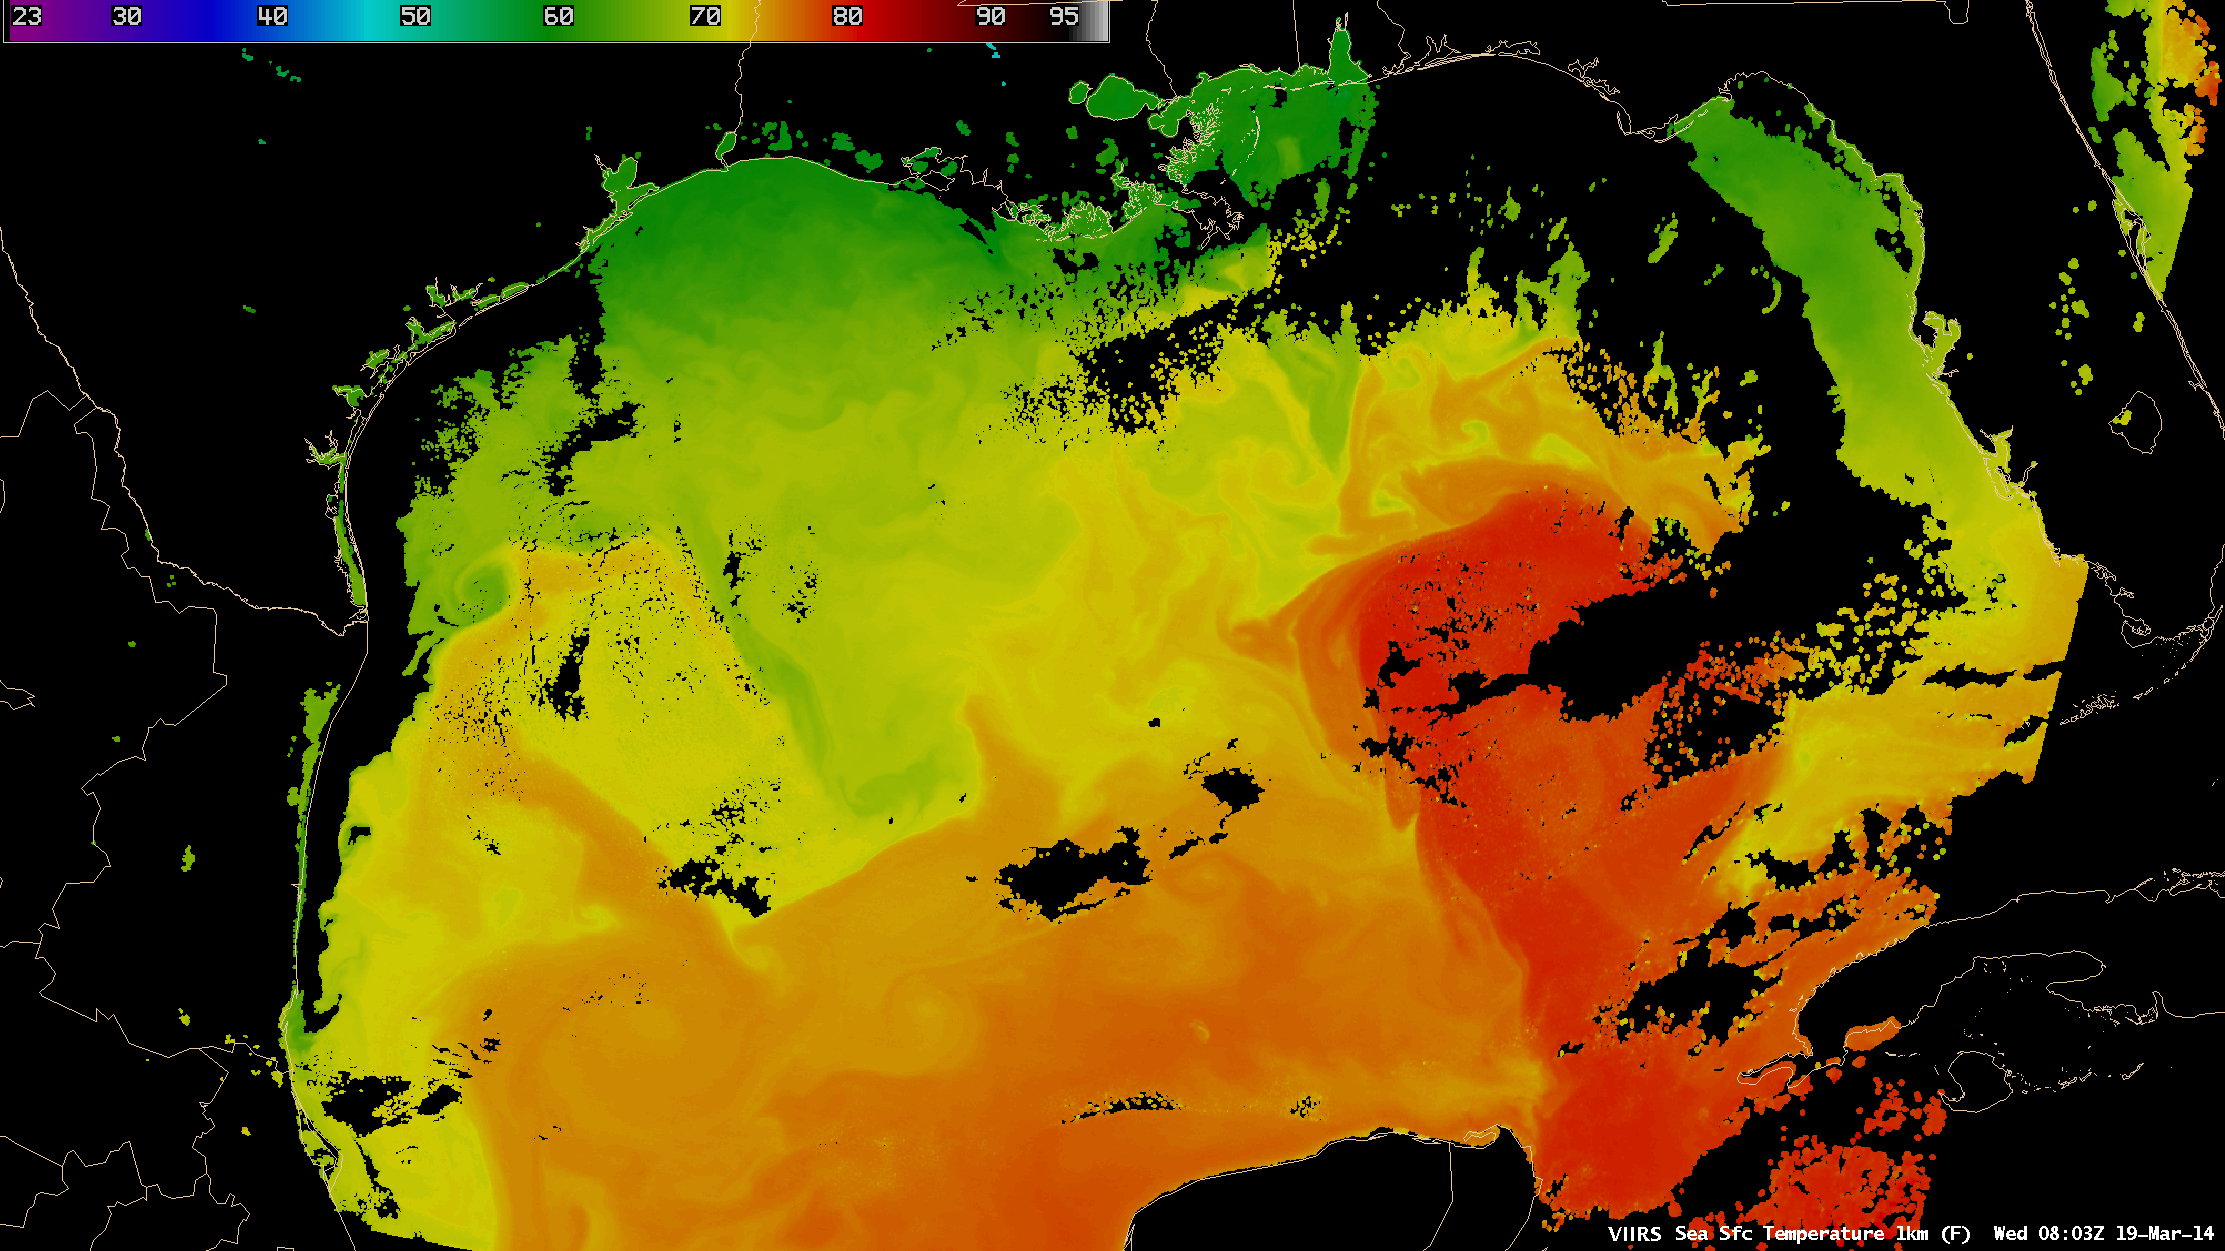 Suomi NPP VIIRS SST images at 08:03 UTC and 19:27 UTC on 19 March